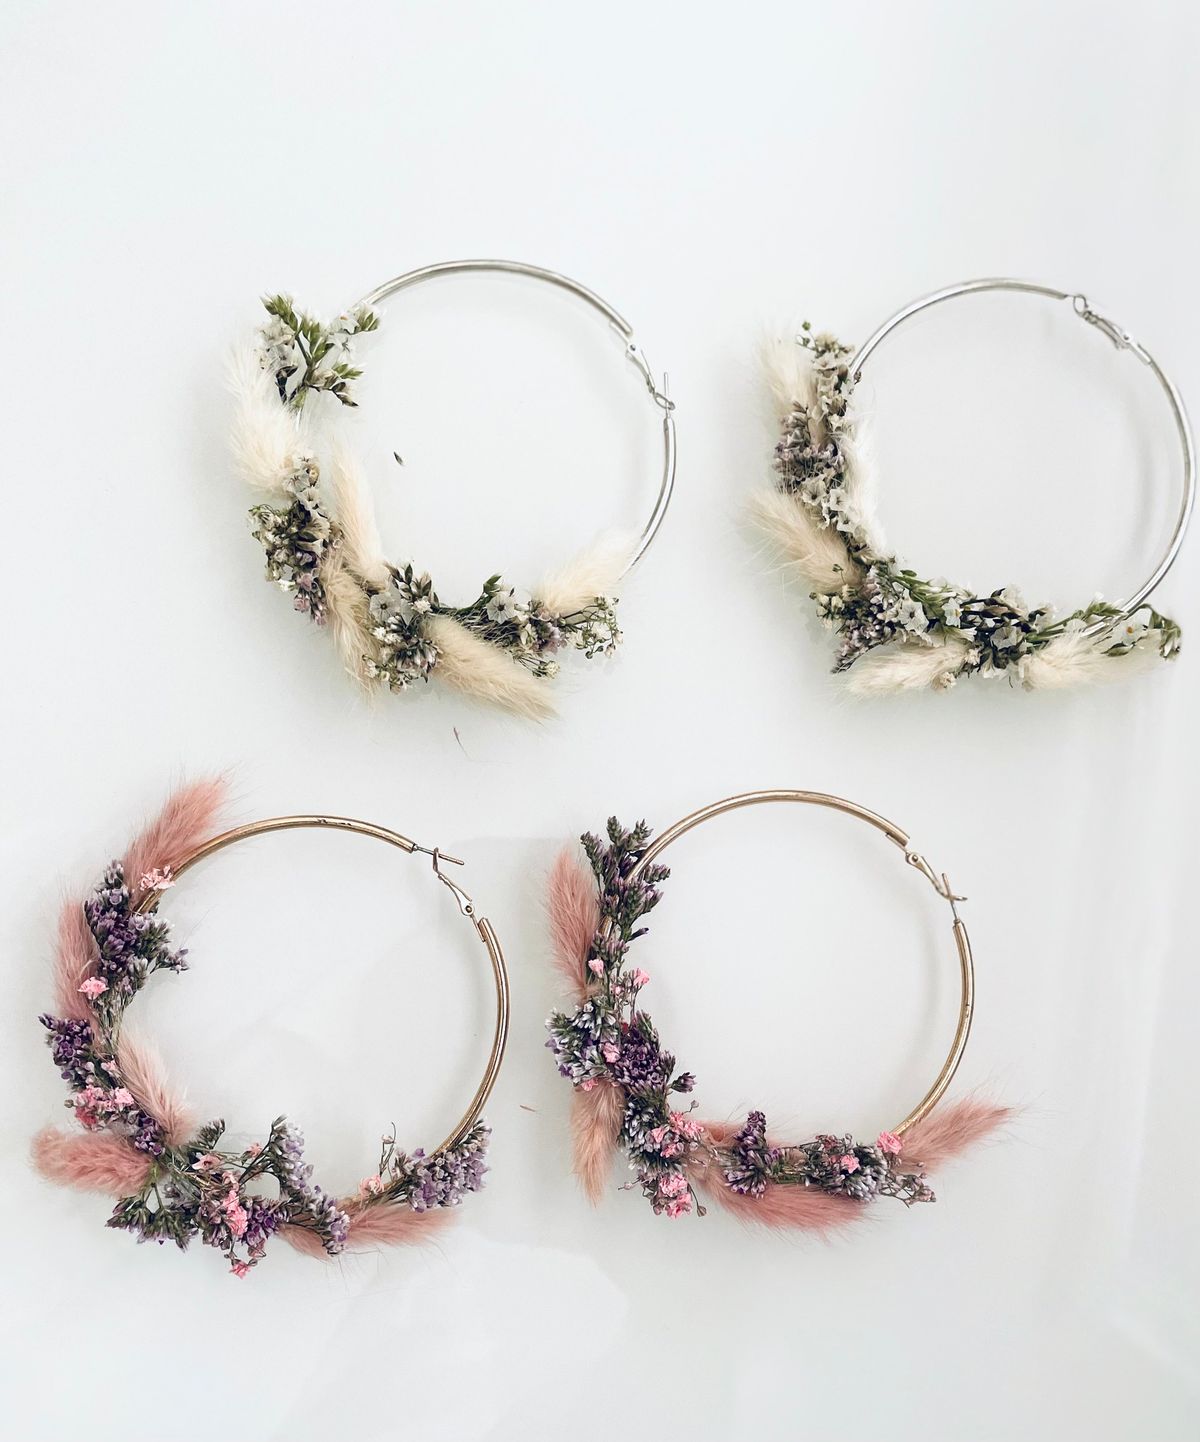 Atelier Floral : Earrings with dried flowers 